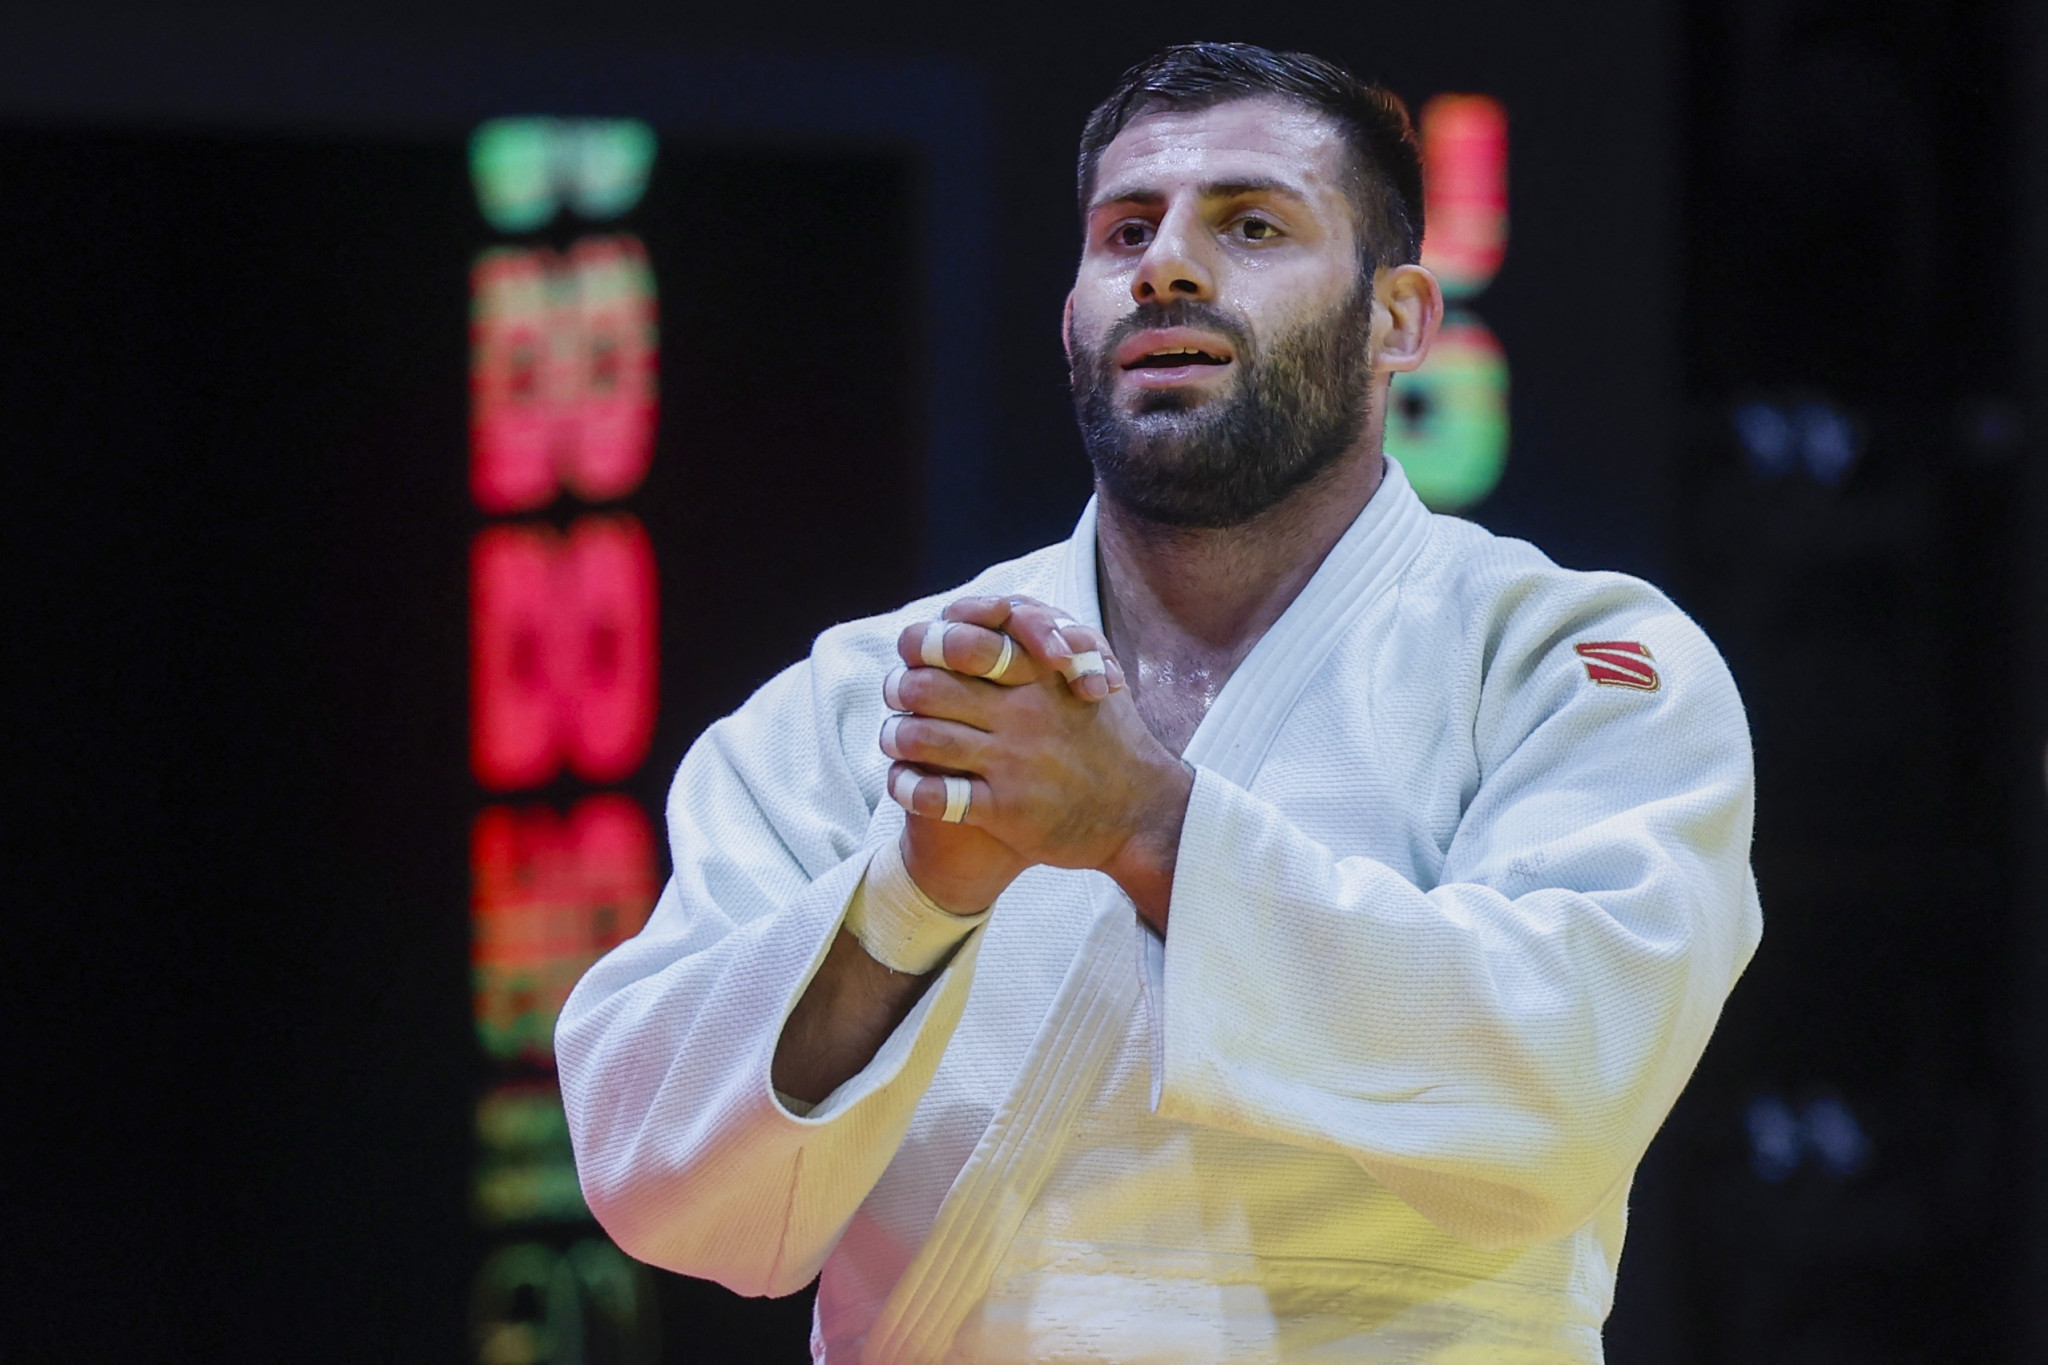 Arman Adamian was hailed by Russian President Vladimir Putin following his victory at the World Judo Championships, which Ukraine also boycotted due to the presence of Russian and Belarusian athletes ©Getty Images